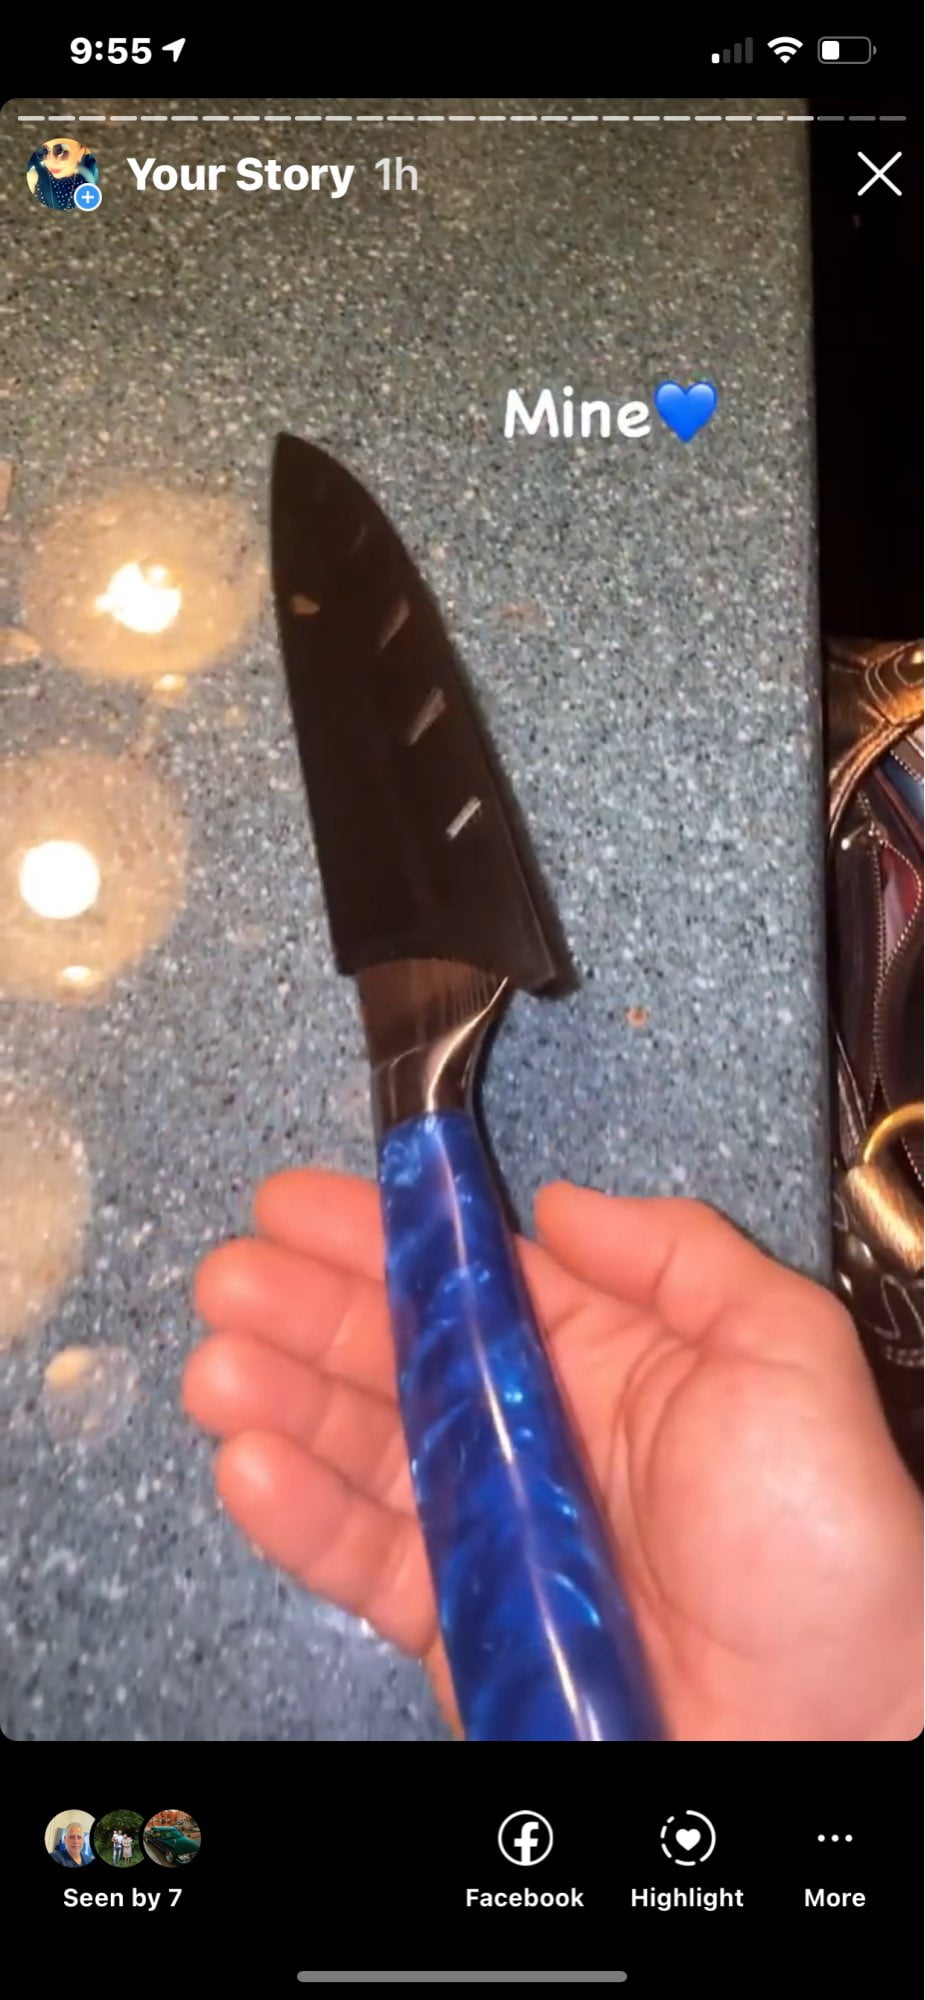 8-inch Japanese Chef Knife with Damascus Pattern and Blue Resin Handle photo review